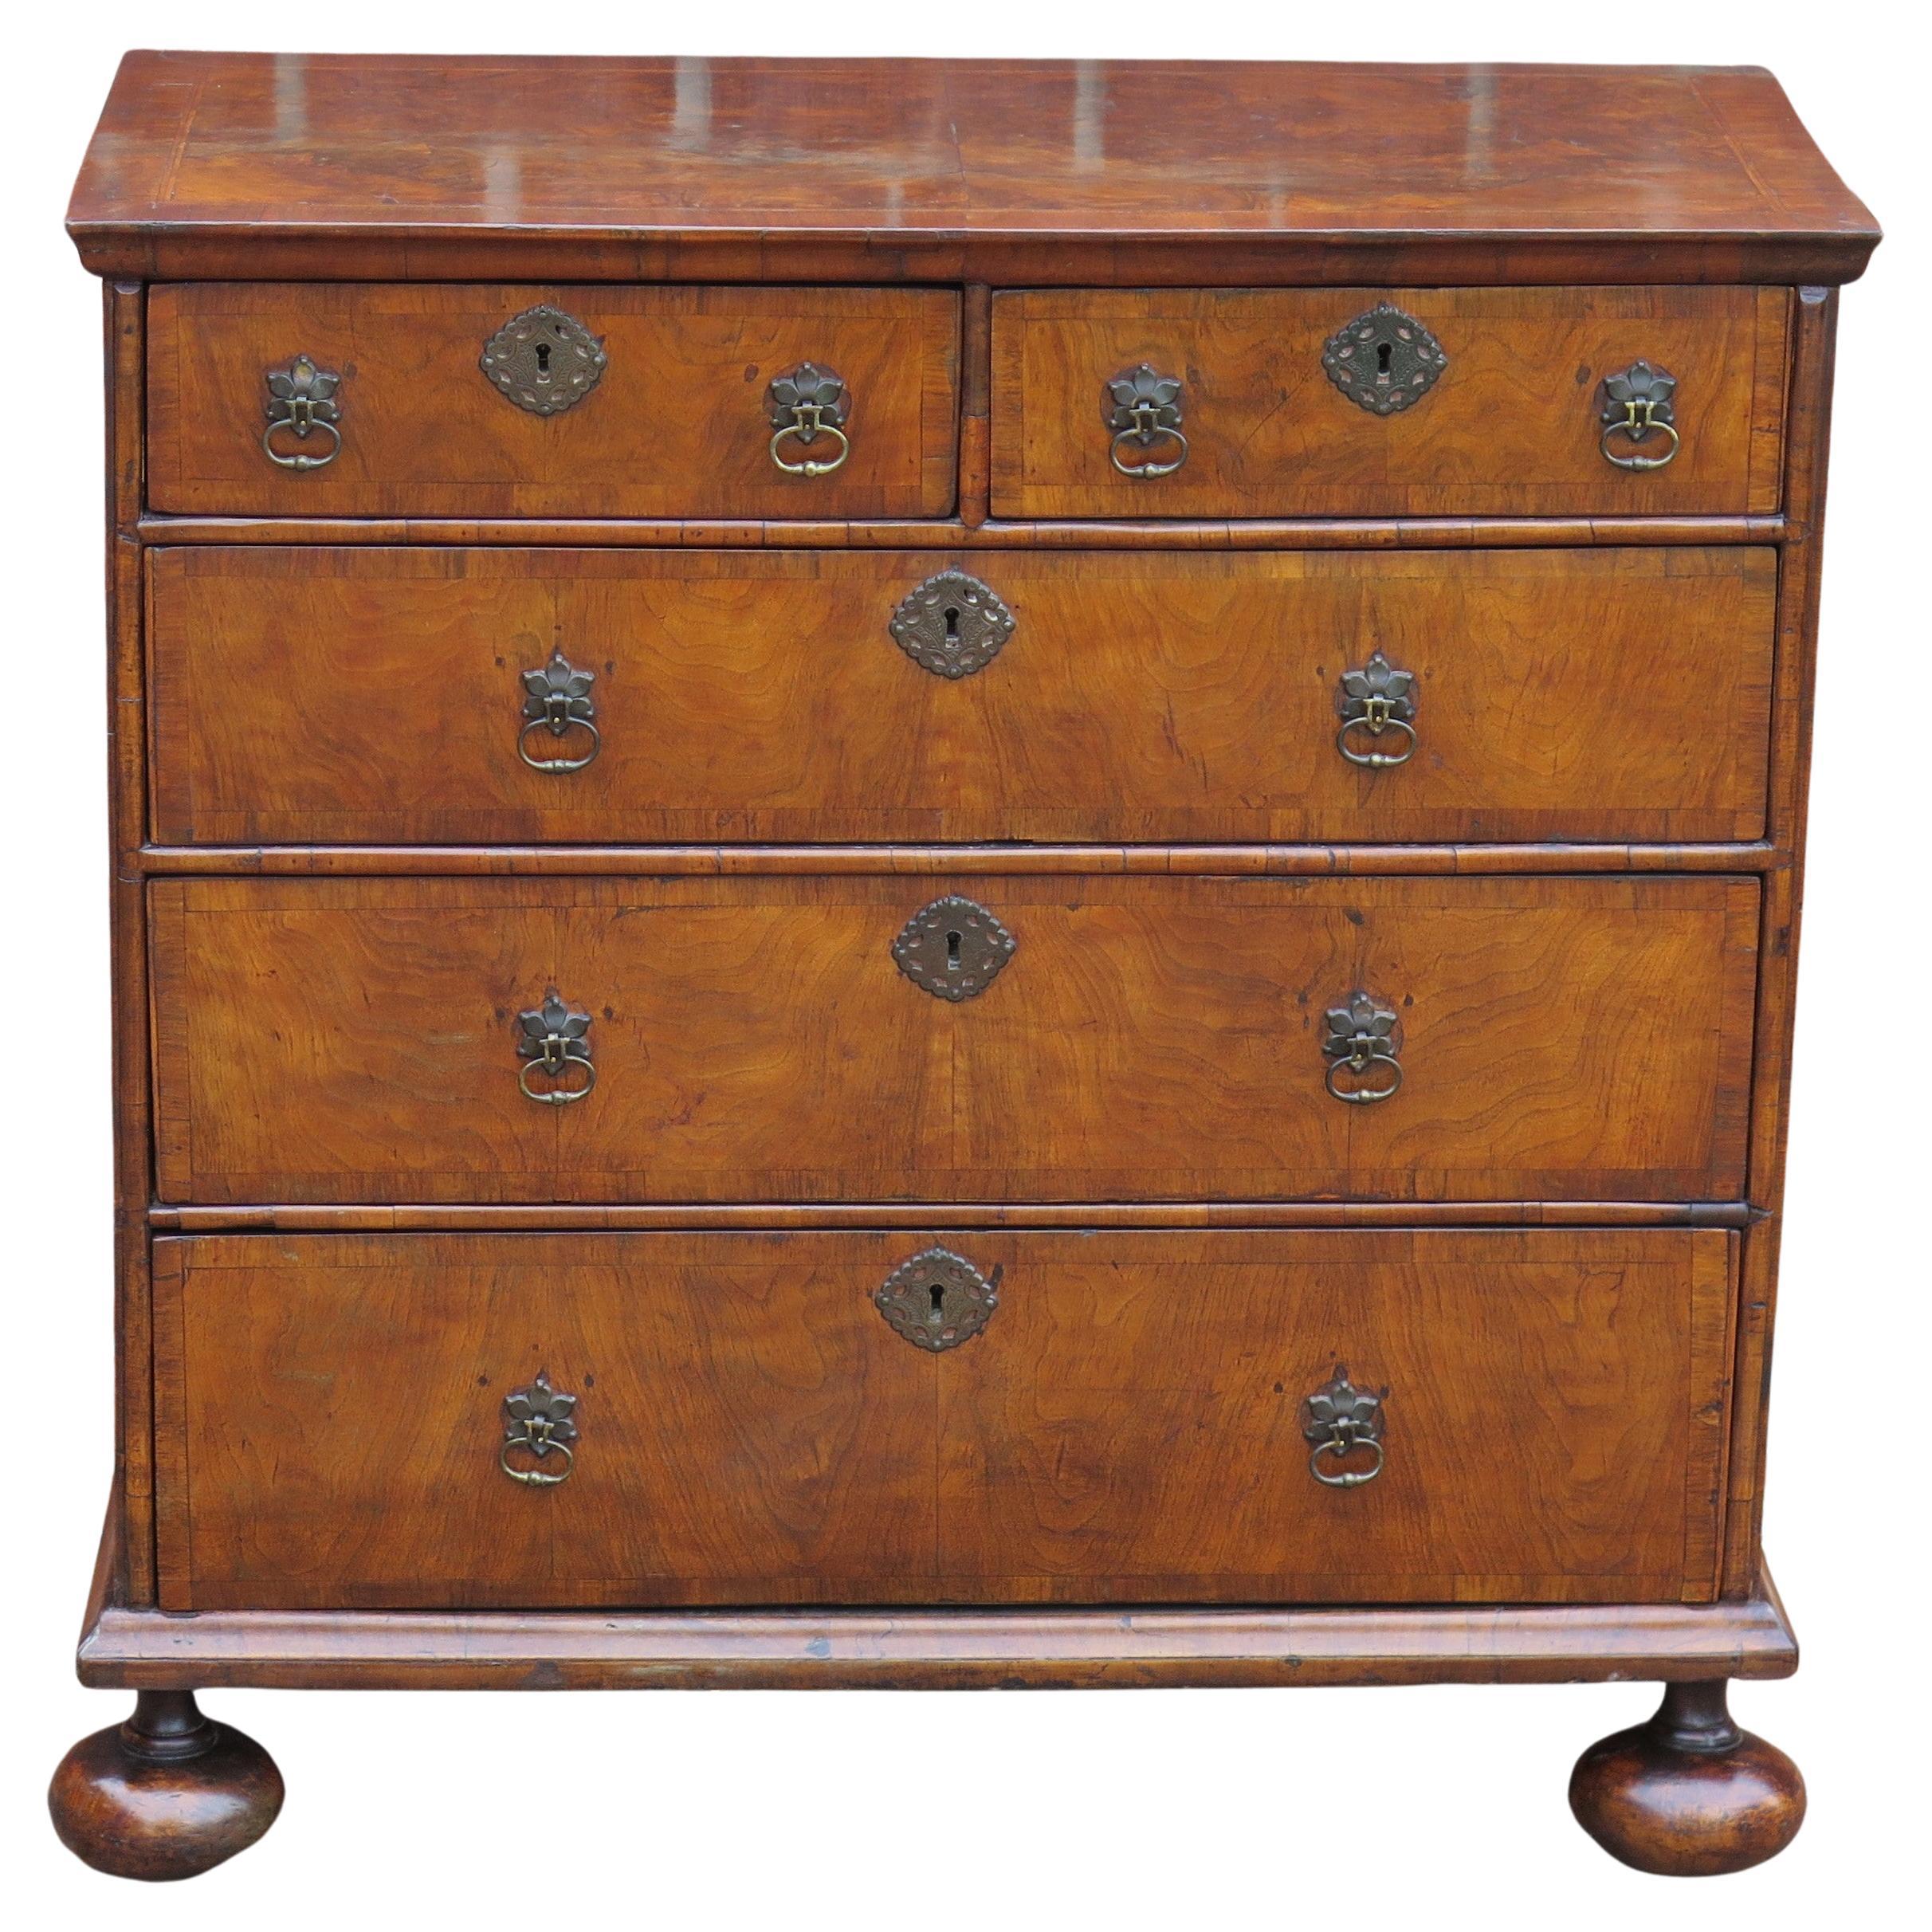 This is a very beautiful Queen Anne period Walnut Chest, circa 1690 to 1700

The Chest has two short over three long graduated drawers with matching thick cross-grained thumb mouldings to the top and lower edge of the chest at the front and sides.